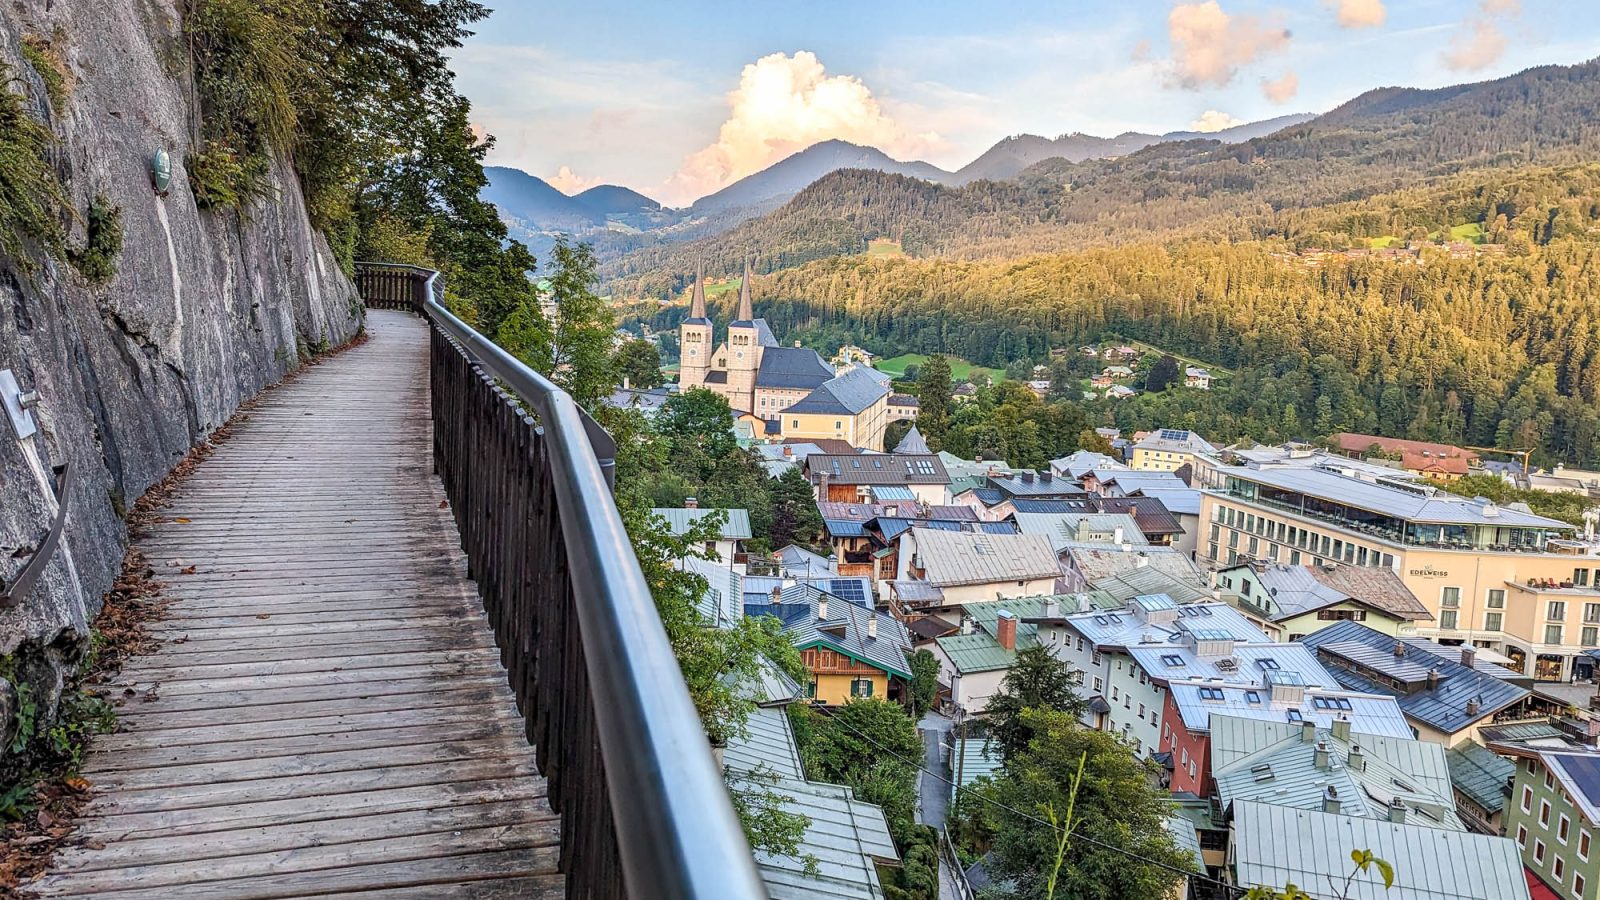 colorful town beneath a wooden walkway on the edge of a mountain